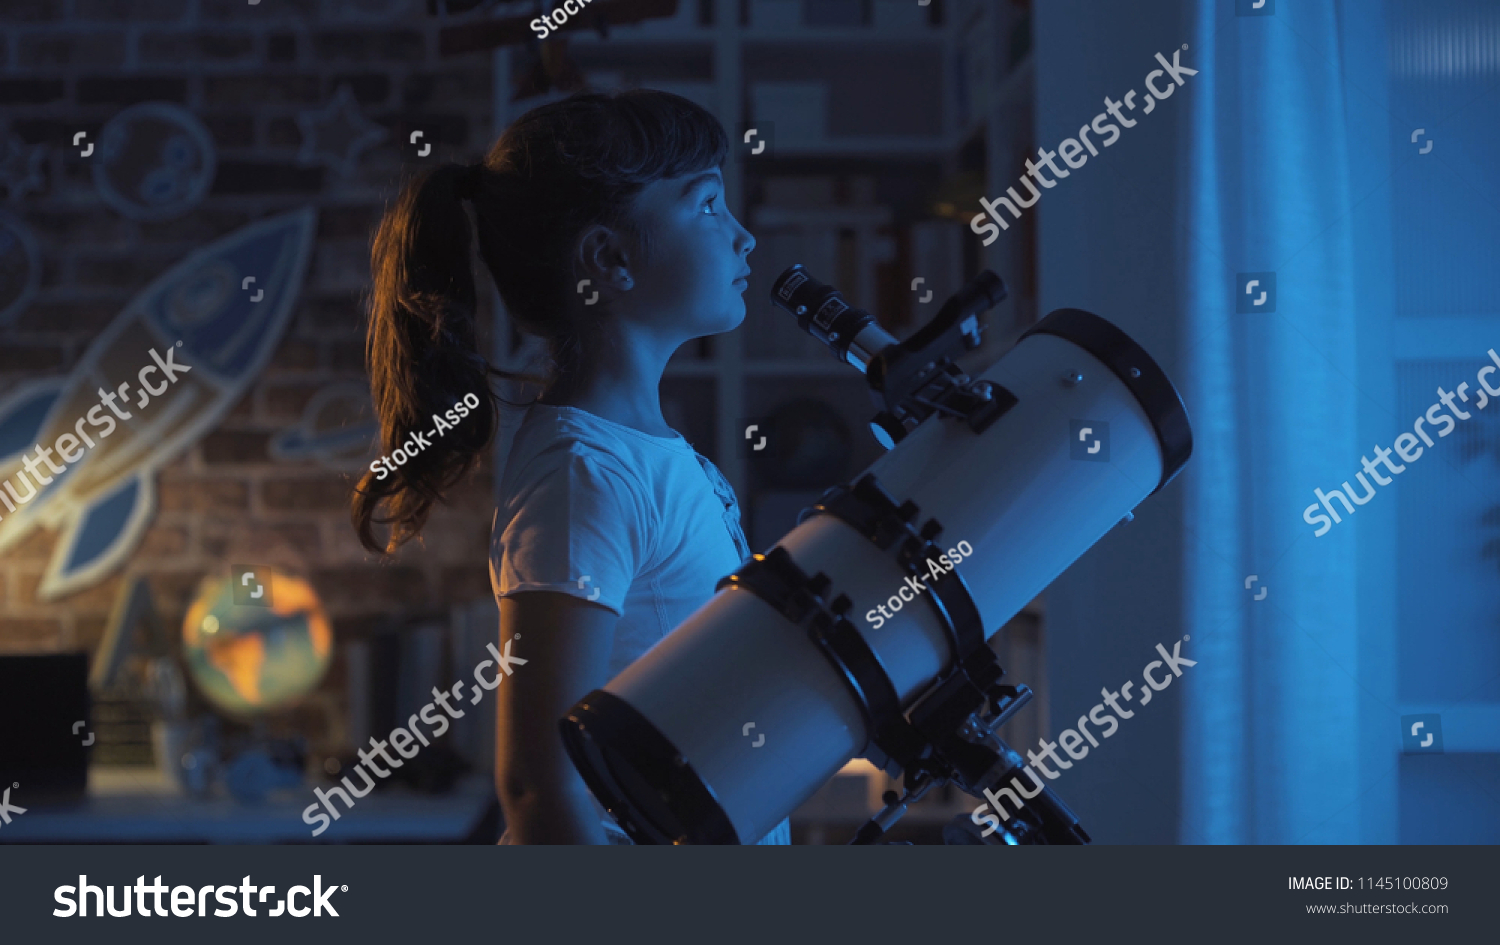 Cute young girl stargazing at night with a telescope, she is looking away: imagination and childhood concept #1145100809